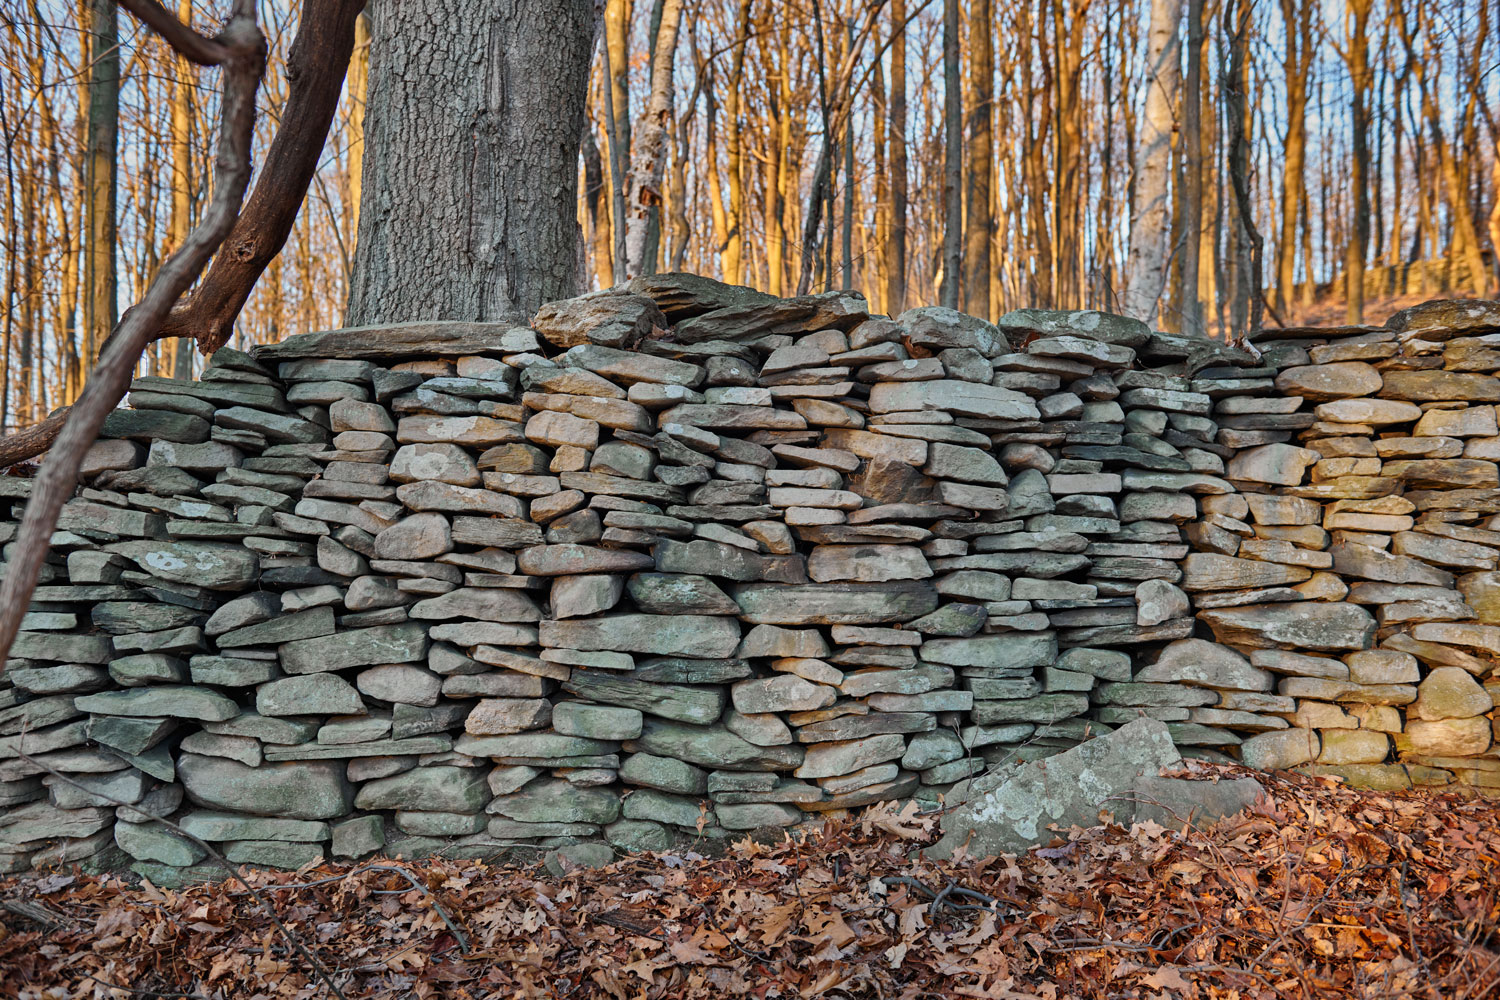 Flat rocks converted to a short manmade wall